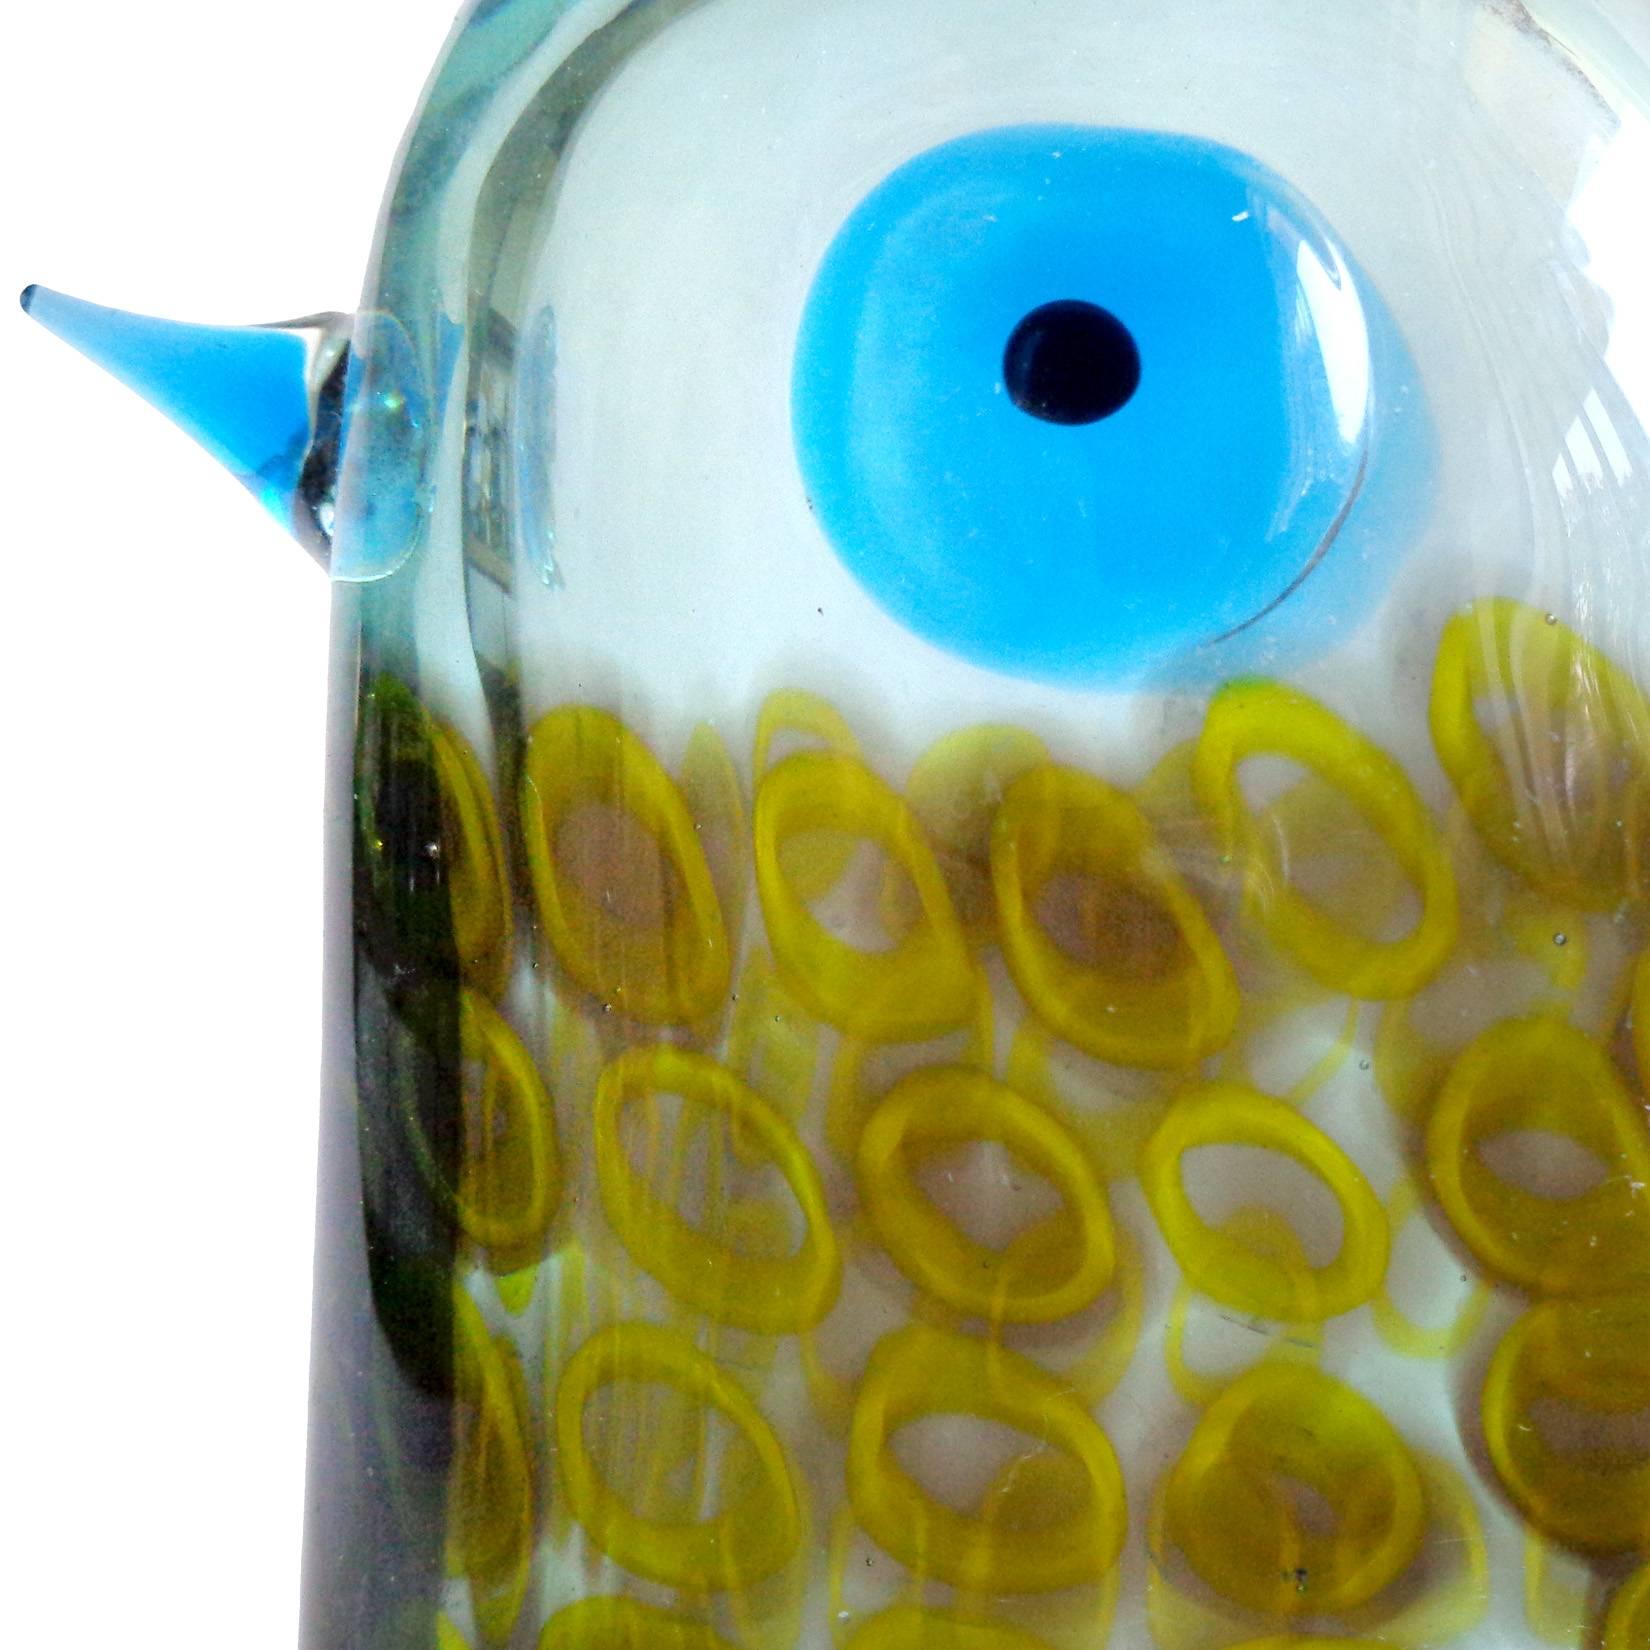 Free shipping worldwide! See details below description.

Rare Murano light blue and yellow circle murrines art glass baby penguin bird sculpture. Attributed to designer Gino Cenedese. The piece is unusually large and very cute shape.

Please